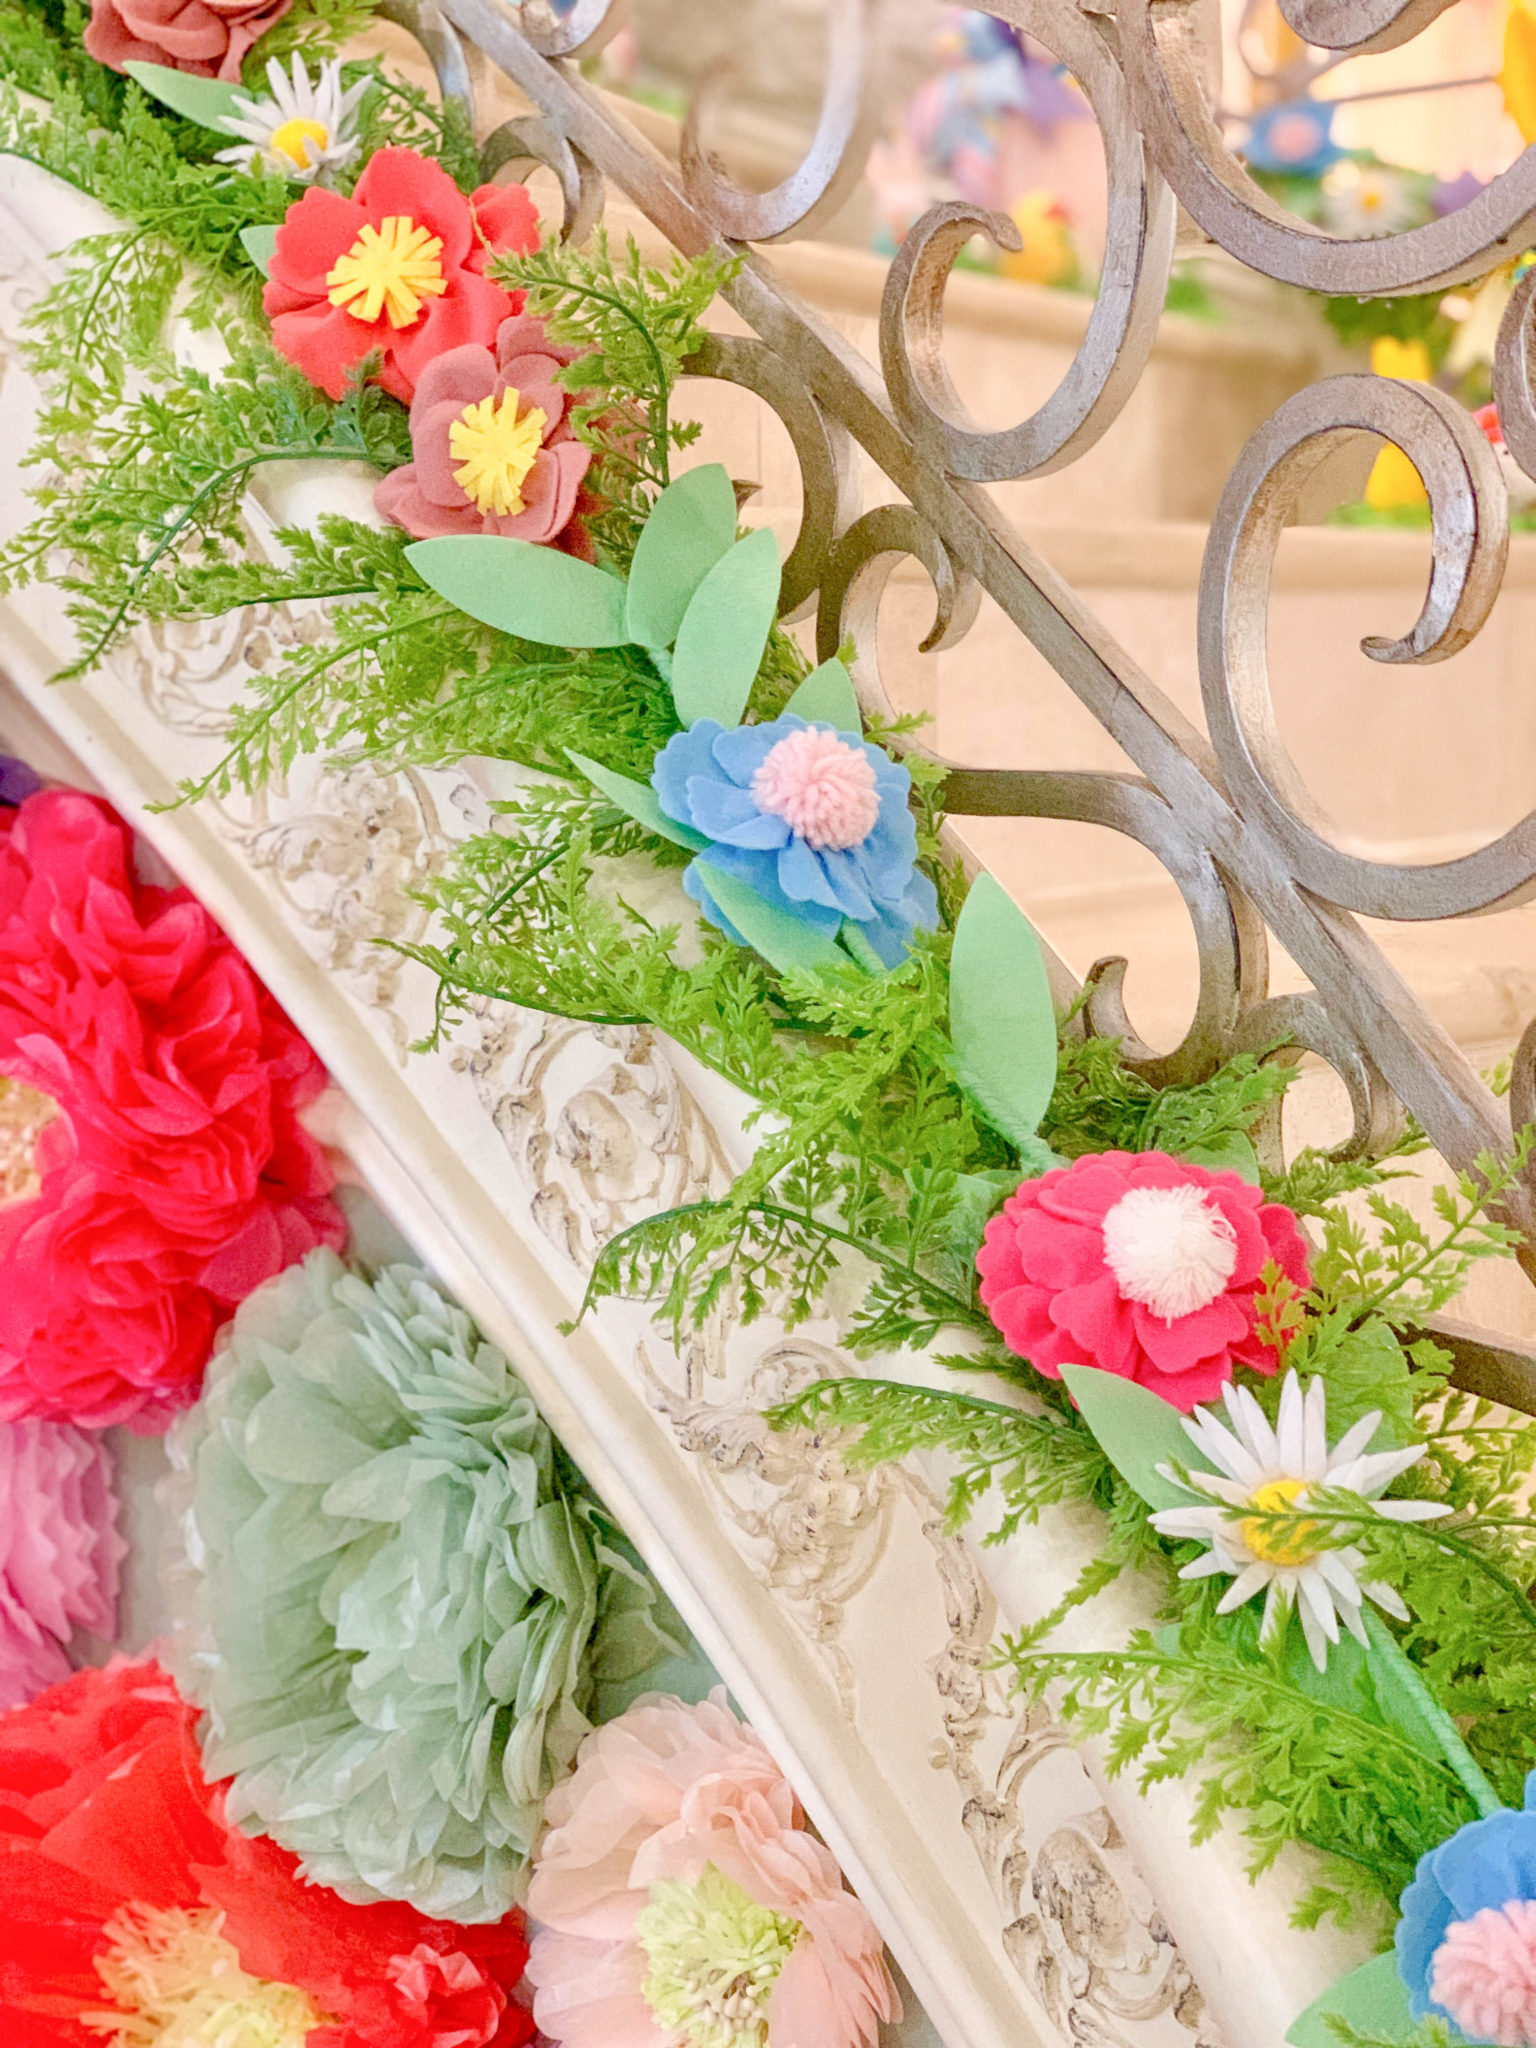 Turtle Creek Lane Home Decor Blog decorates for Easter with Garlands from Michaels